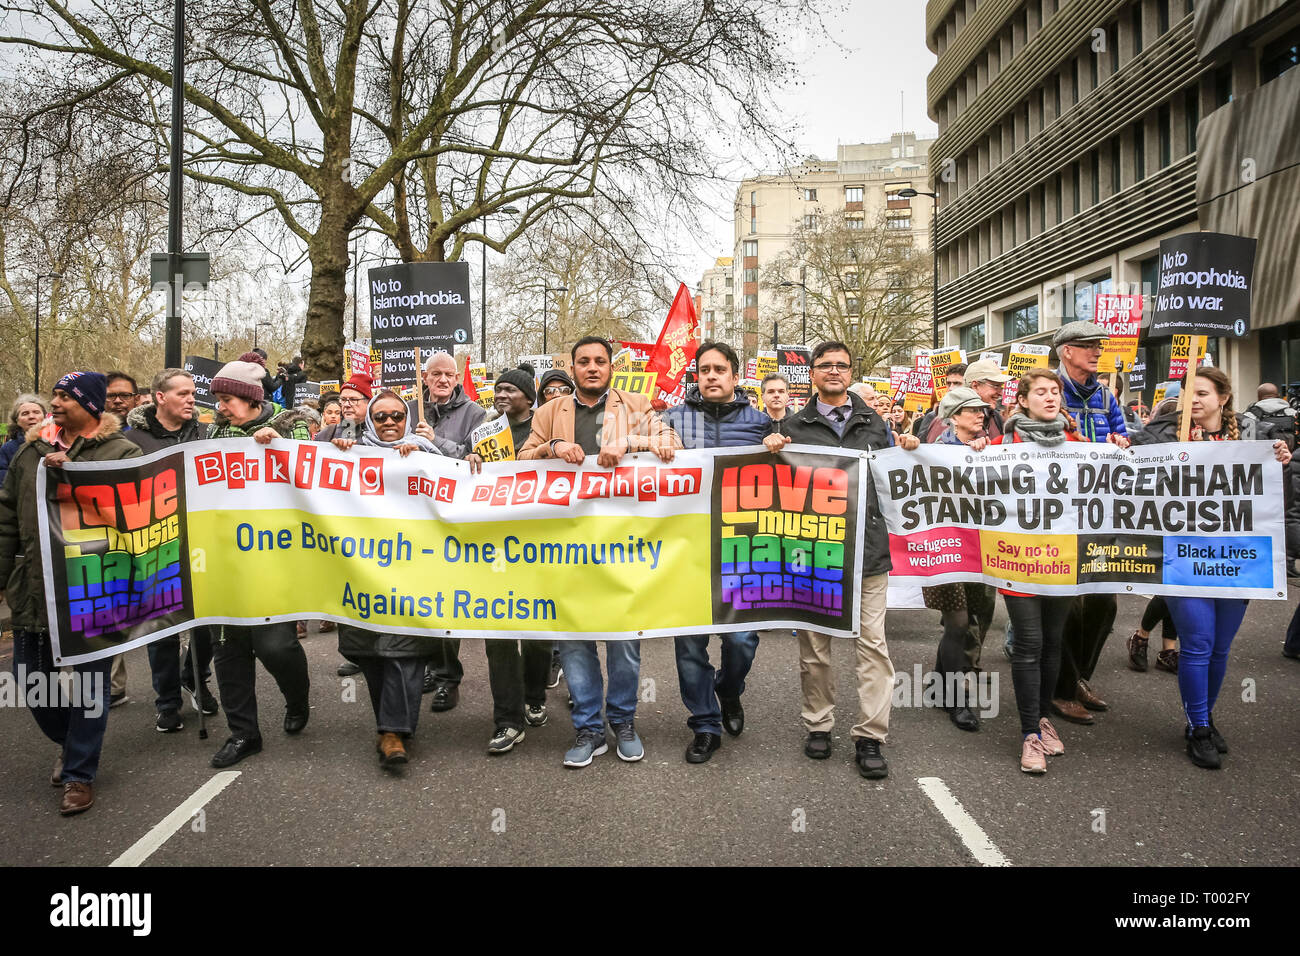 London, UK, 16th Mar 2019.  Protesters in central London.  A march, organised by activist groups 'Stand Up to Racism' and 'Love Music Hate Racism', and supported by unions TUC and UNISON, proceeds from Hyde Park Corner via Piccadilly and Trafalgar Square to Whitehall and Downing Street in Westminster. Similar events are held in other locations on UN Anti Racism Day. Credit: Imageplotter/Alamy Live News Stock Photo